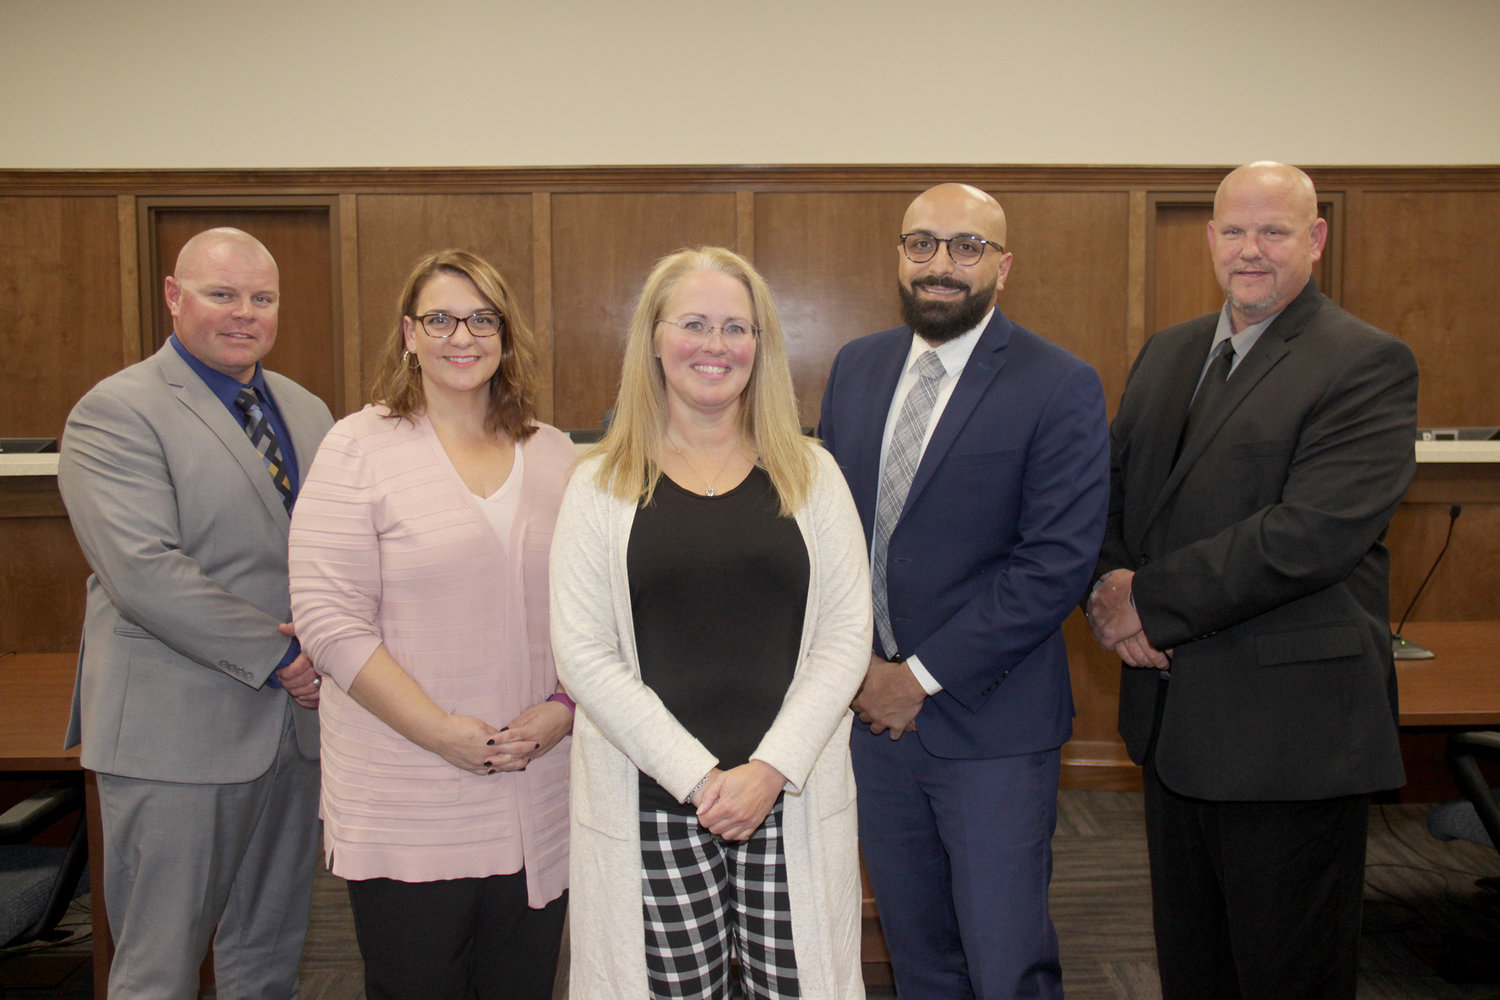 NEW LEADERS FOR WRIGHT CITY — Michelle Heiliger, center, was appointed to serve as Wright City’s mayor by her fellow aldermen on Oct. 14. Karey Owens, in pink, was appointed to Heiliger’s newly open seat on the board of aldermen. With them, from left, are aldermen Nathan Rohr, Ramiz Hakim and Don Andrews.